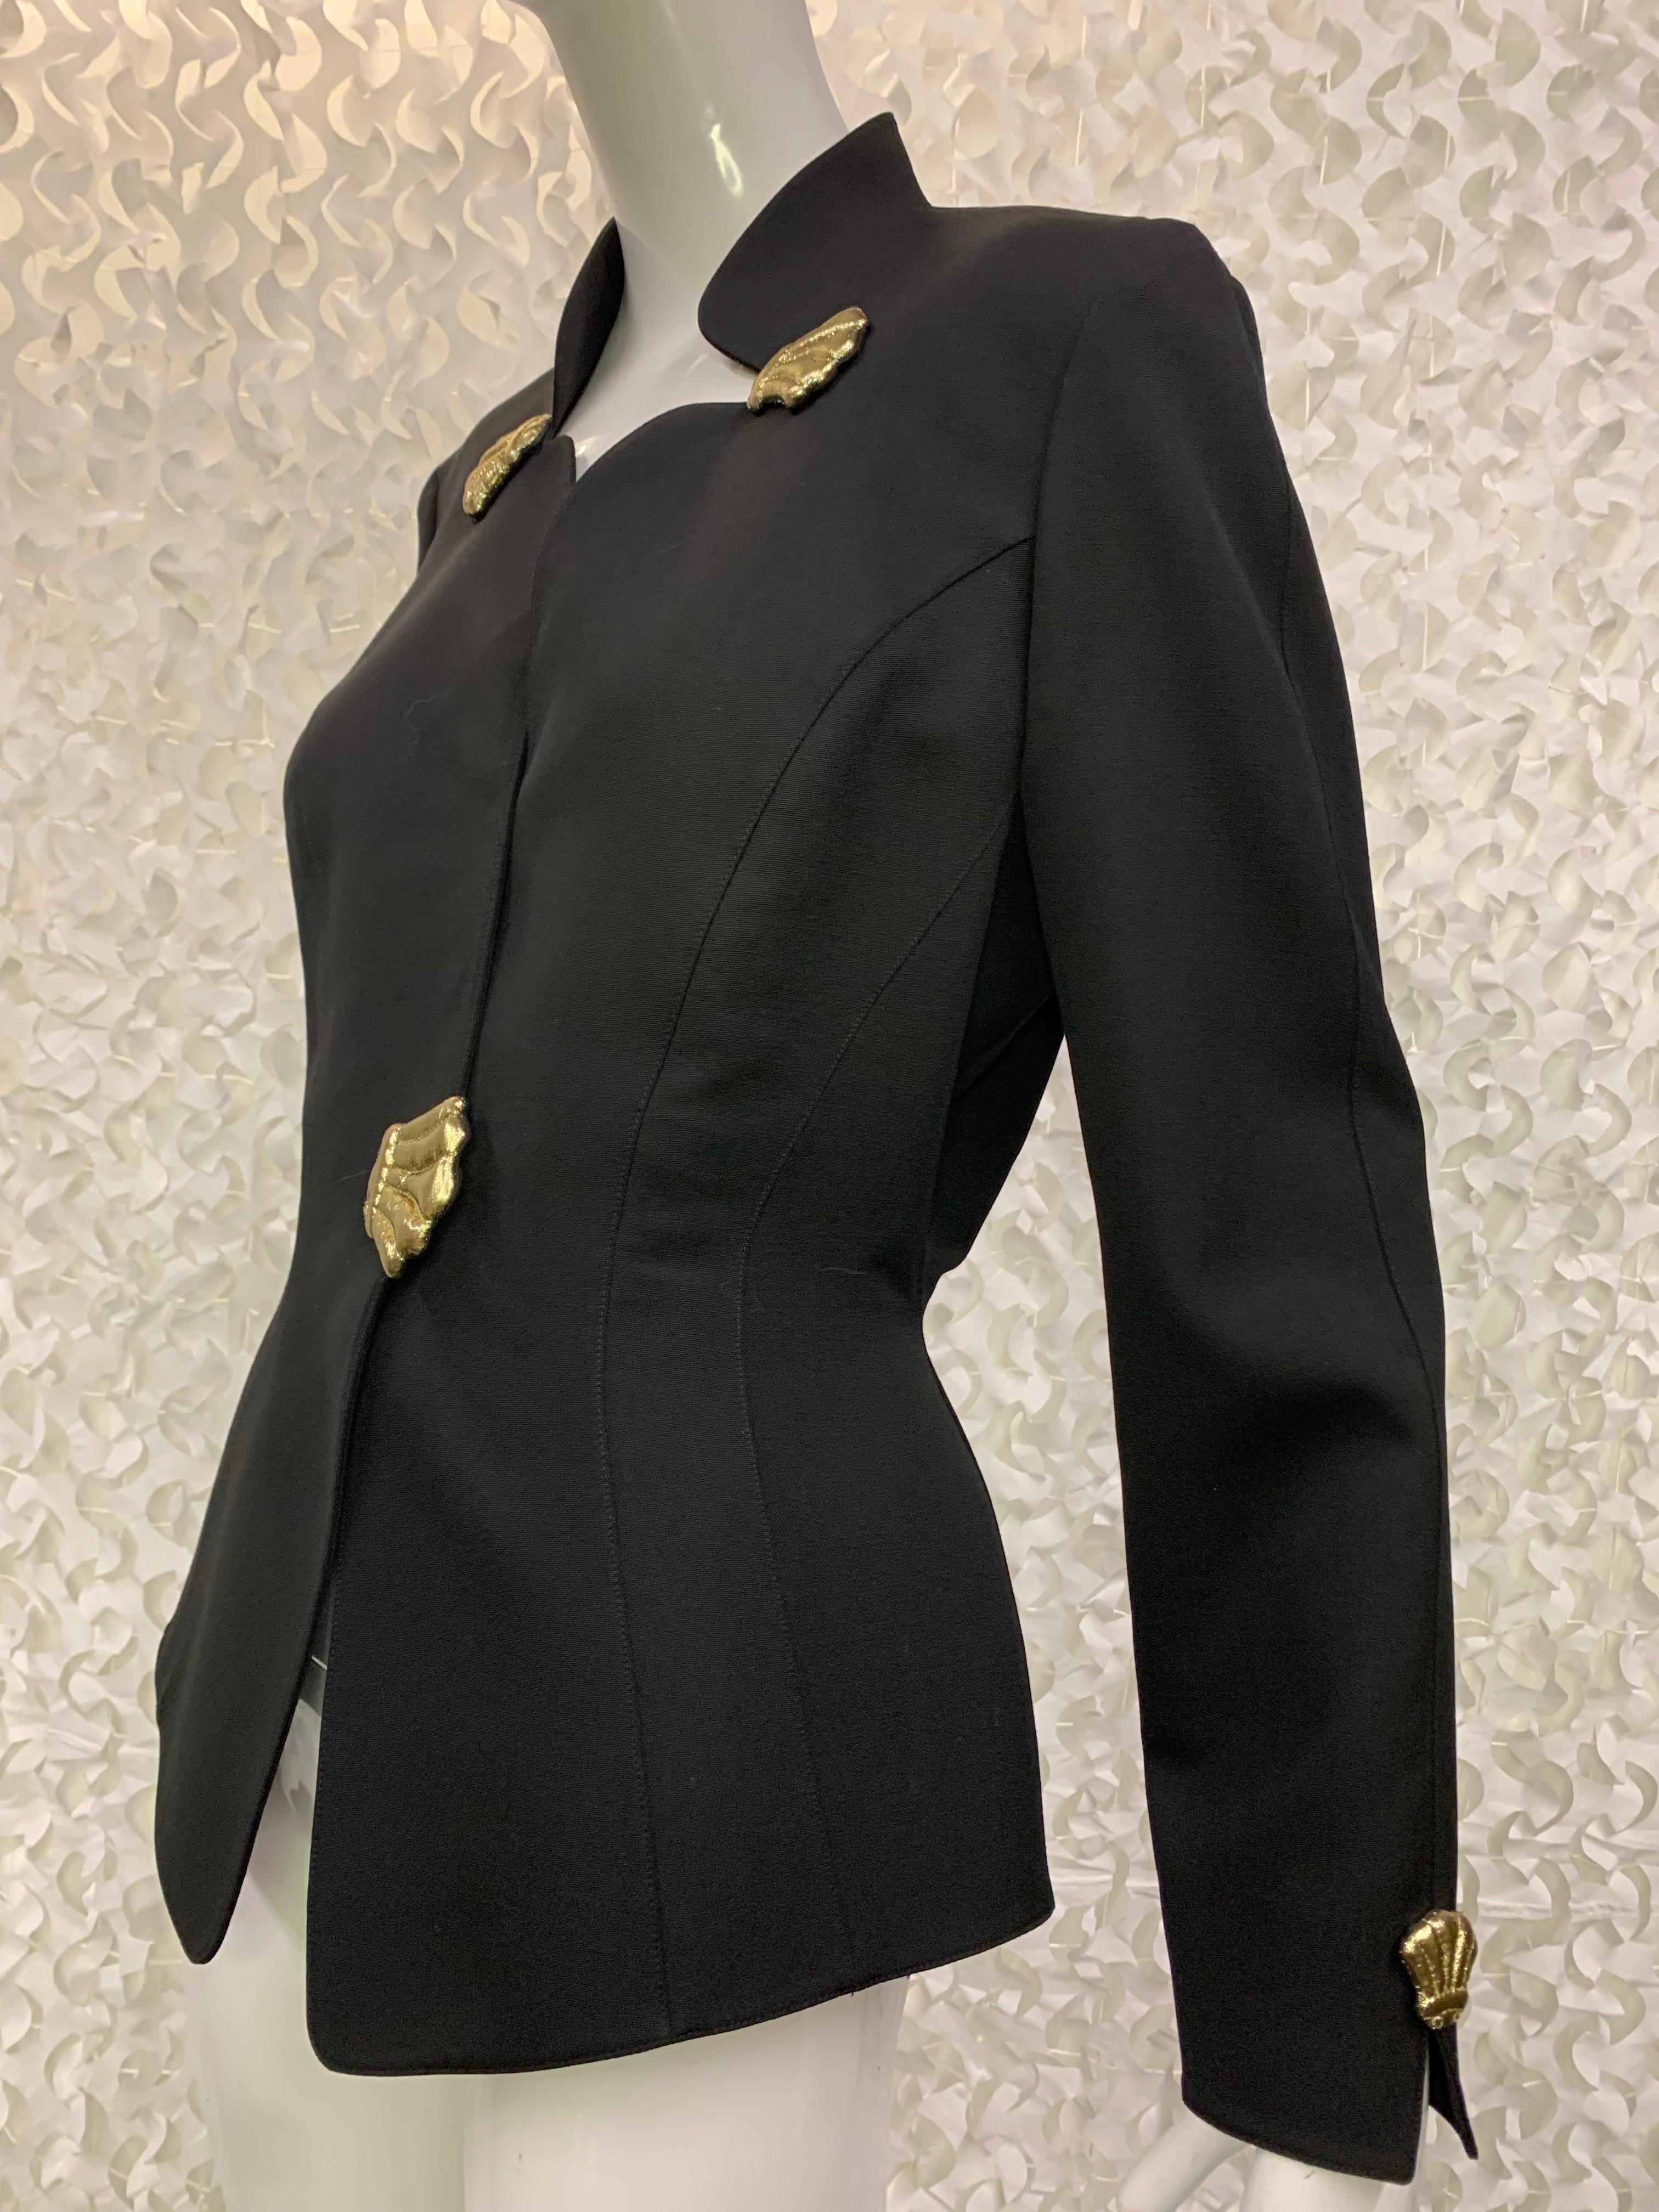 1990s Thierry Mugler Black Wool Crepe Jacket w Gold Lame Fabric Shell Details  1